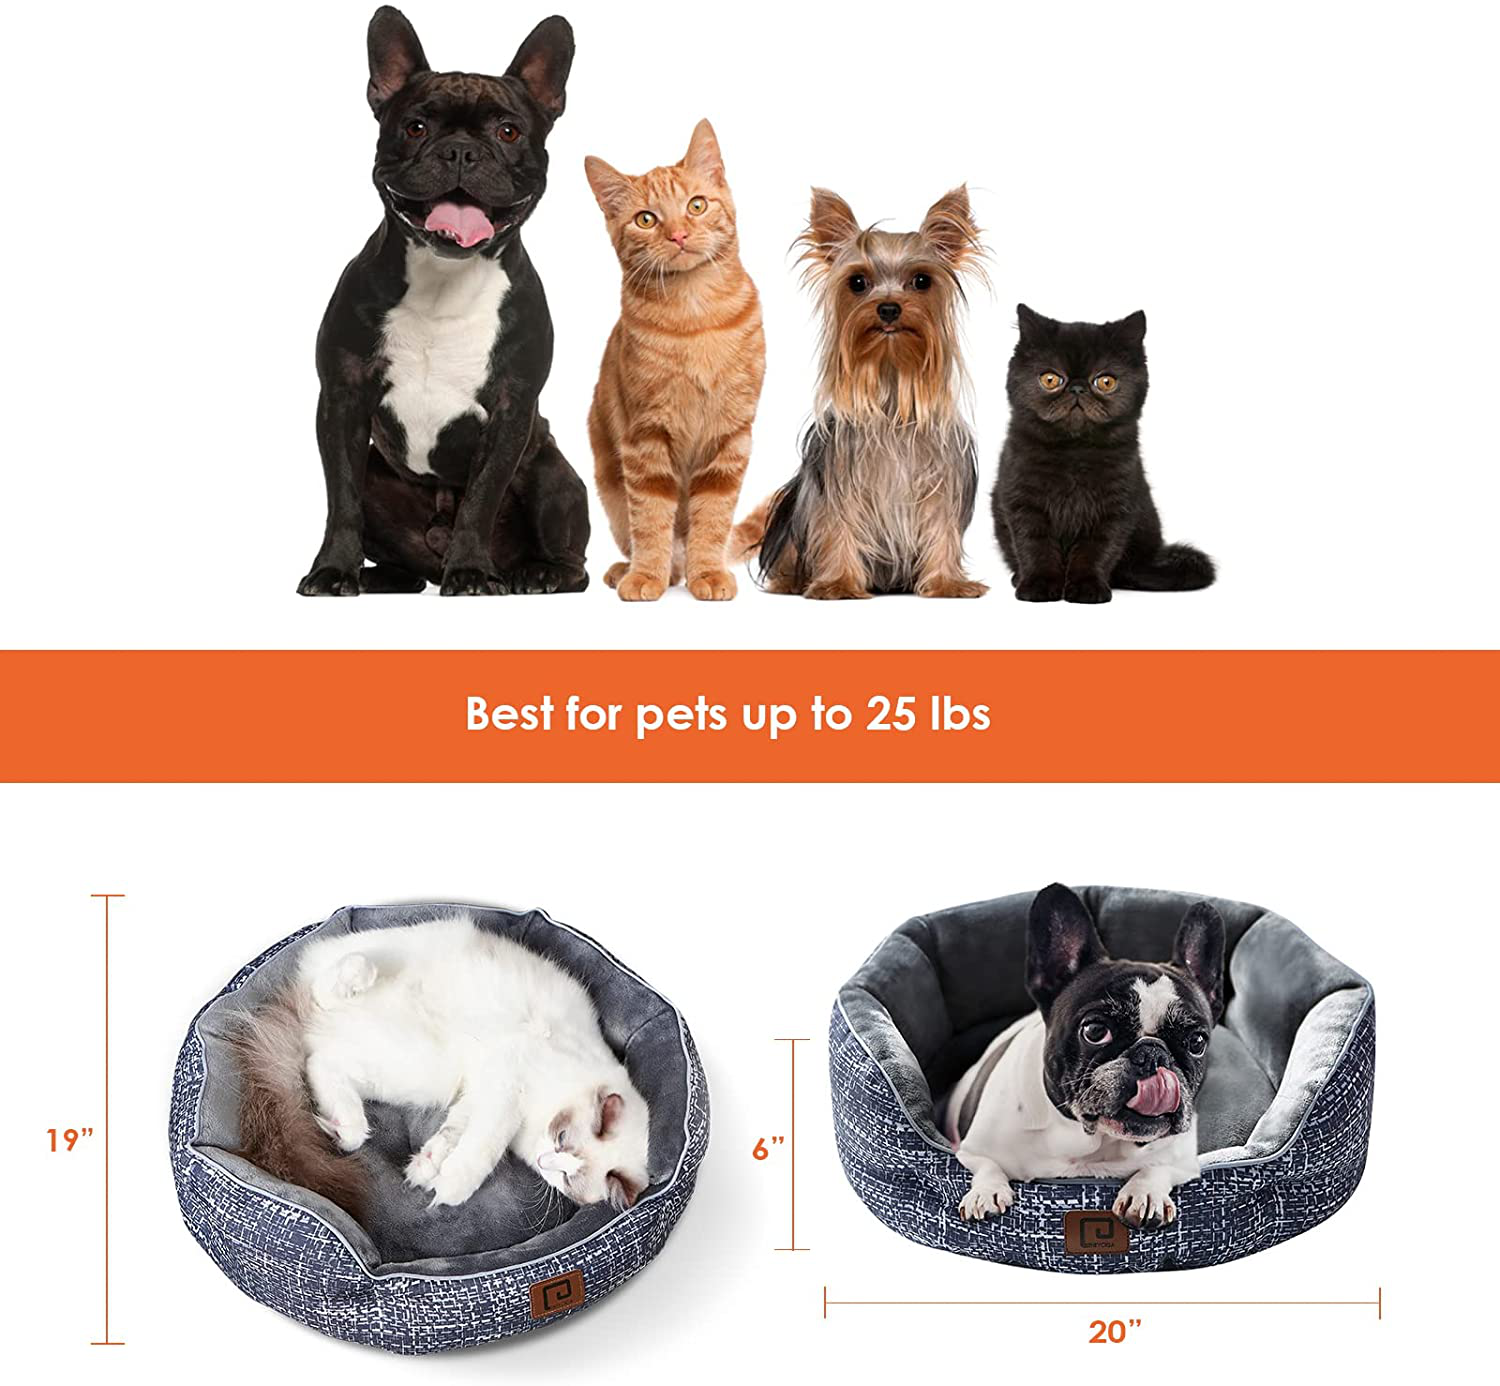 EHEYCIGA Dog Beds for Indoor Small Dogs or Cats 20 Inches round Flannel Fbric with Anti-Slip Oxford Bottom, Machine Washable Dog Bed for All Seasons